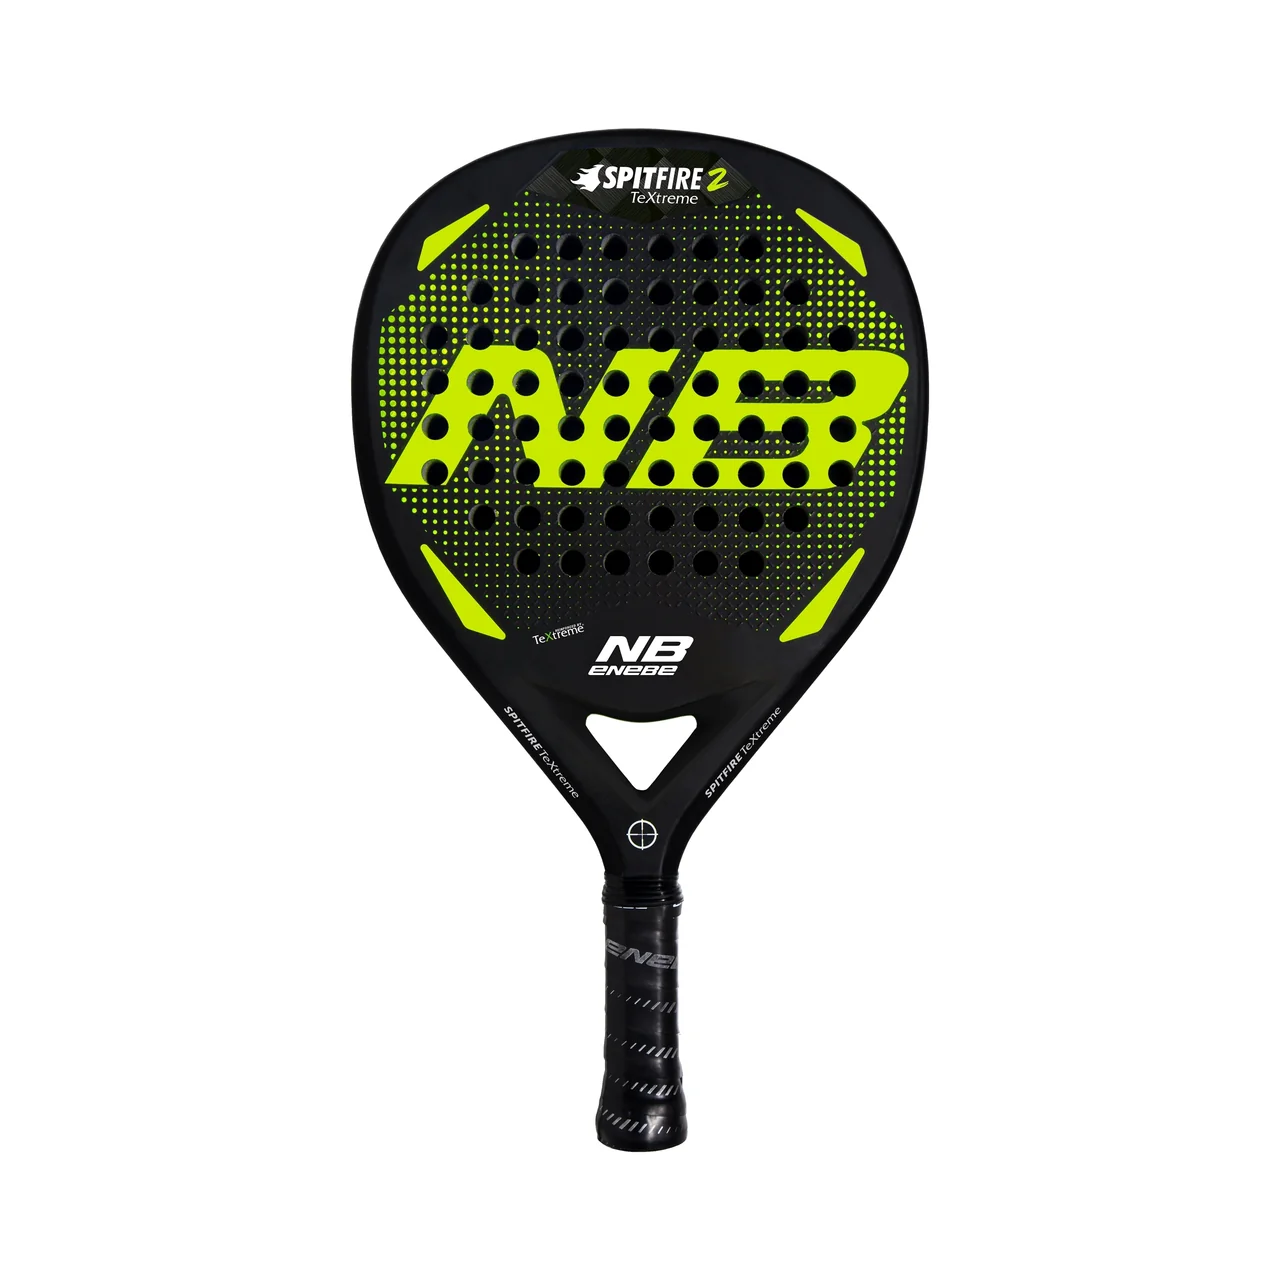 Enebe Spitfire 2 Textreme